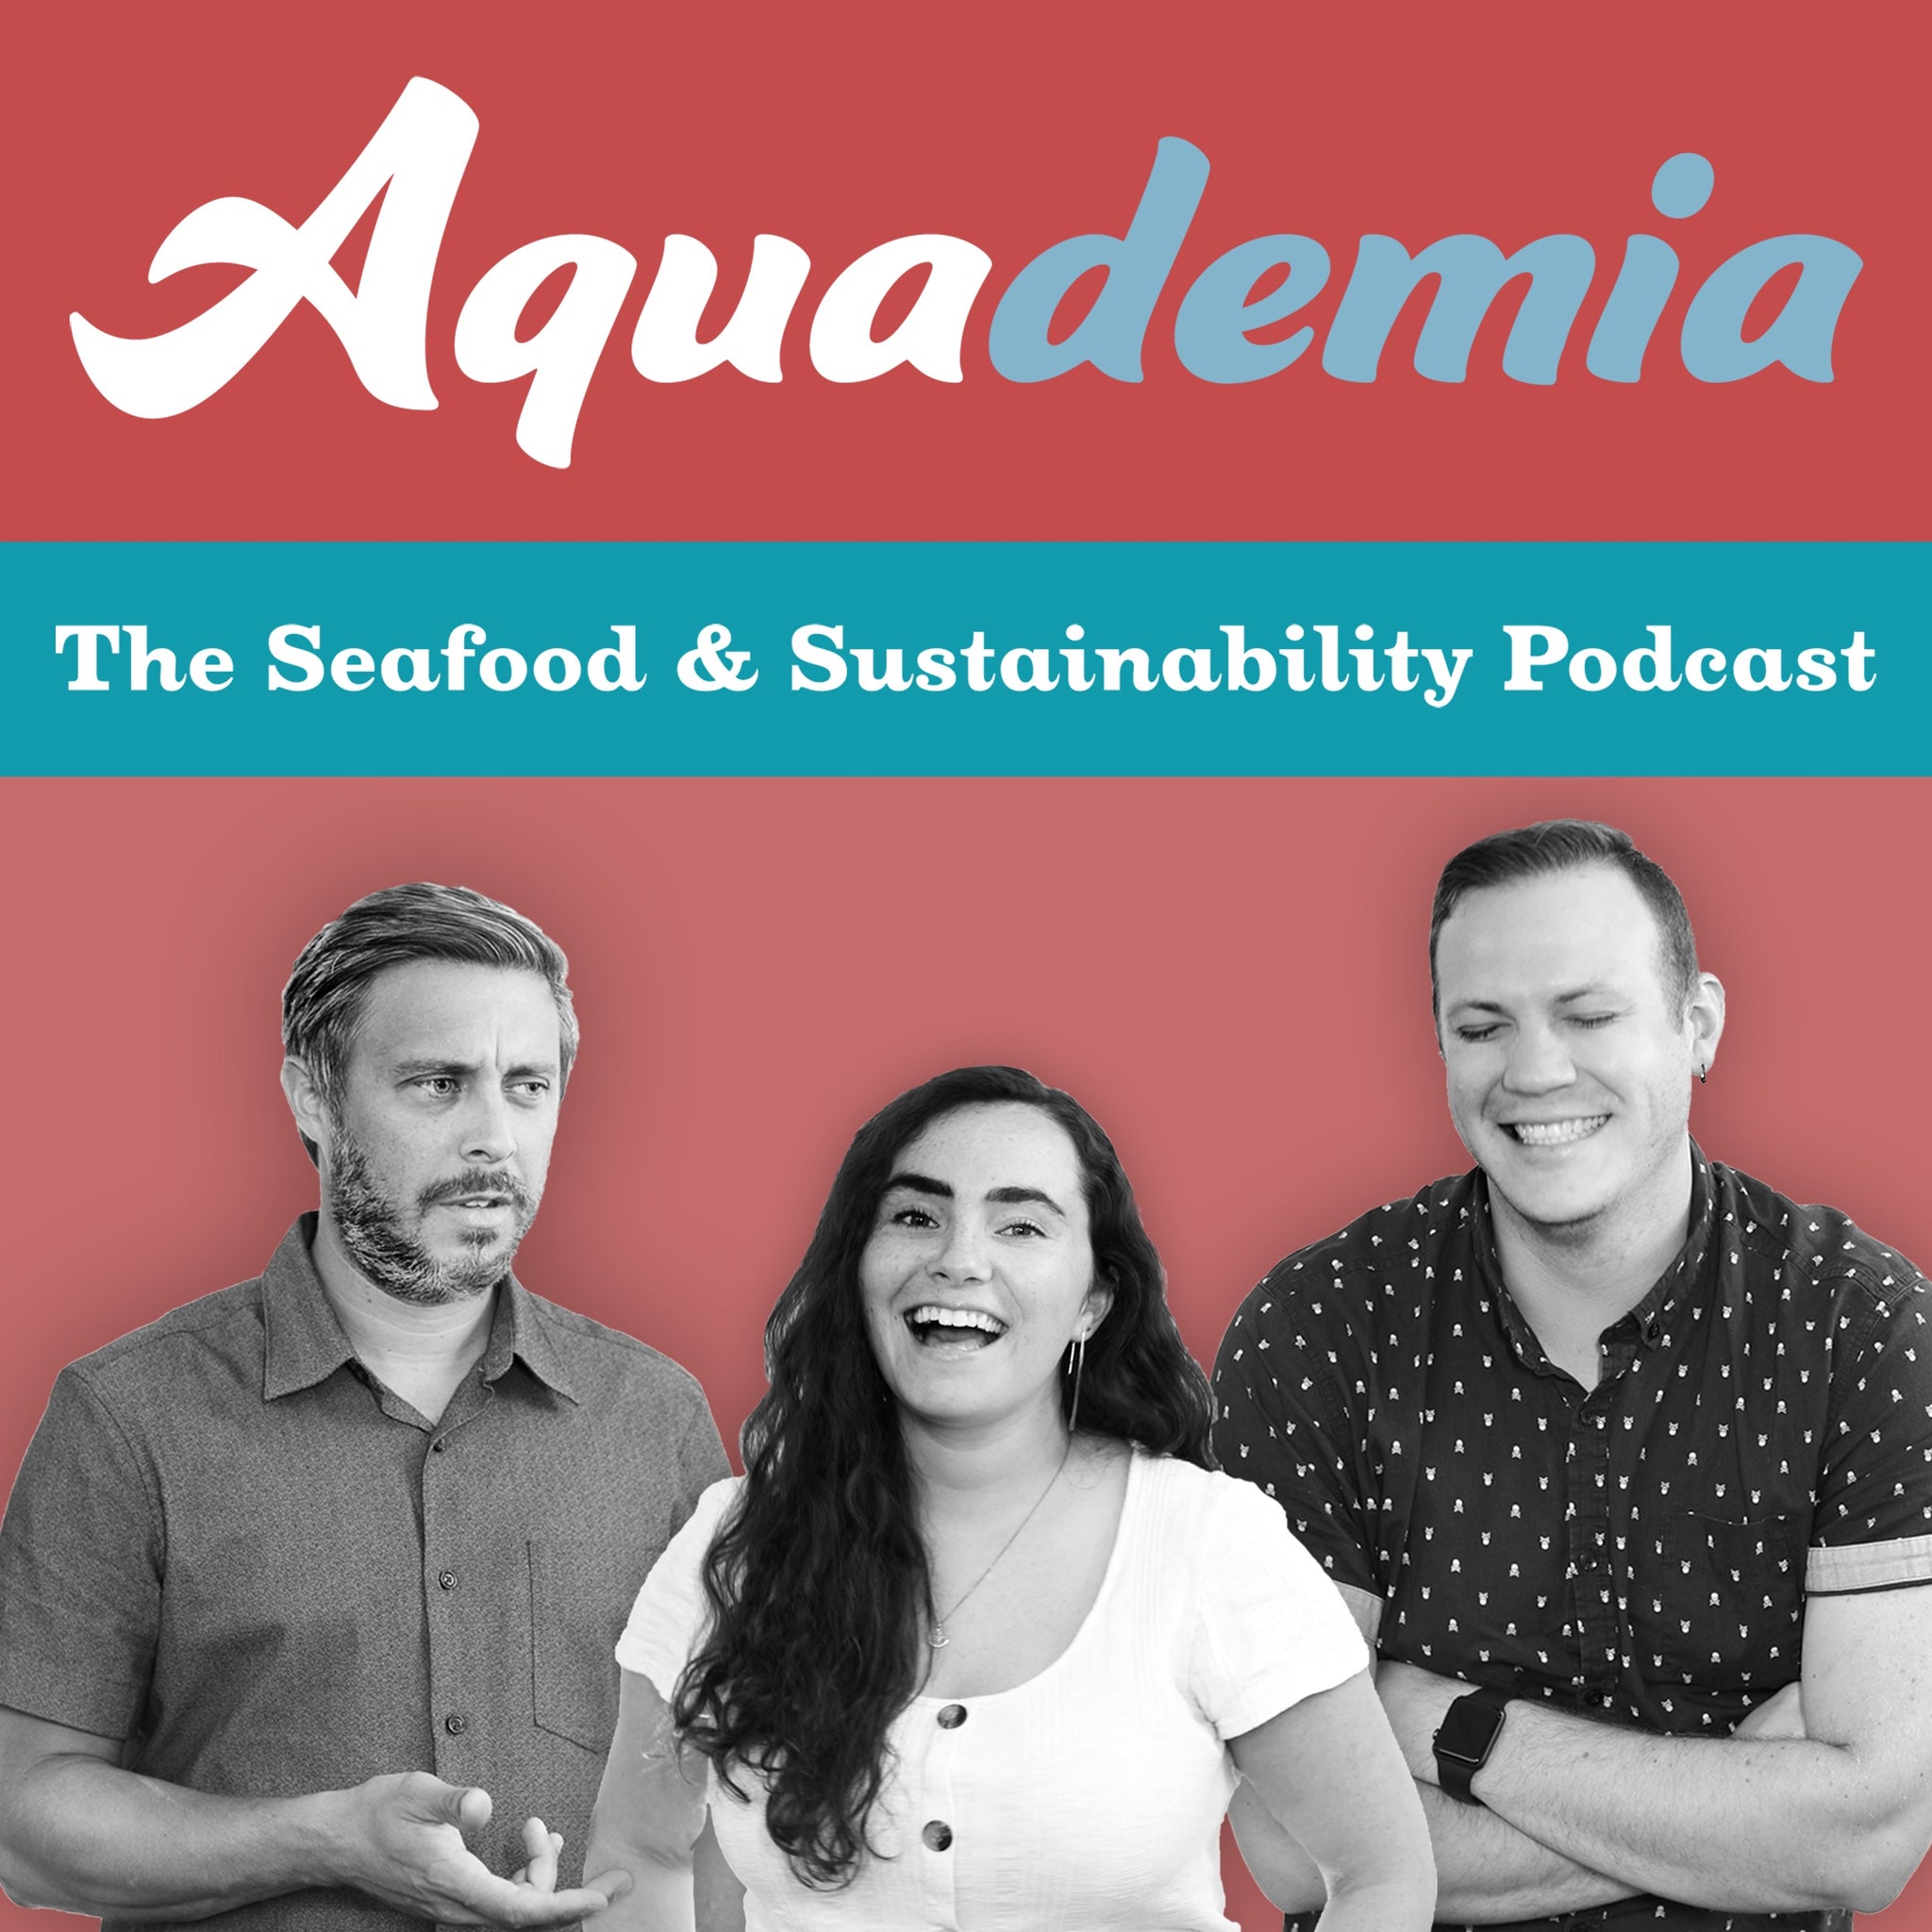 "Restoring the Maine Scallop Industry with the Scallop Queen, Togue Brawn" - Global Seafood Alliance